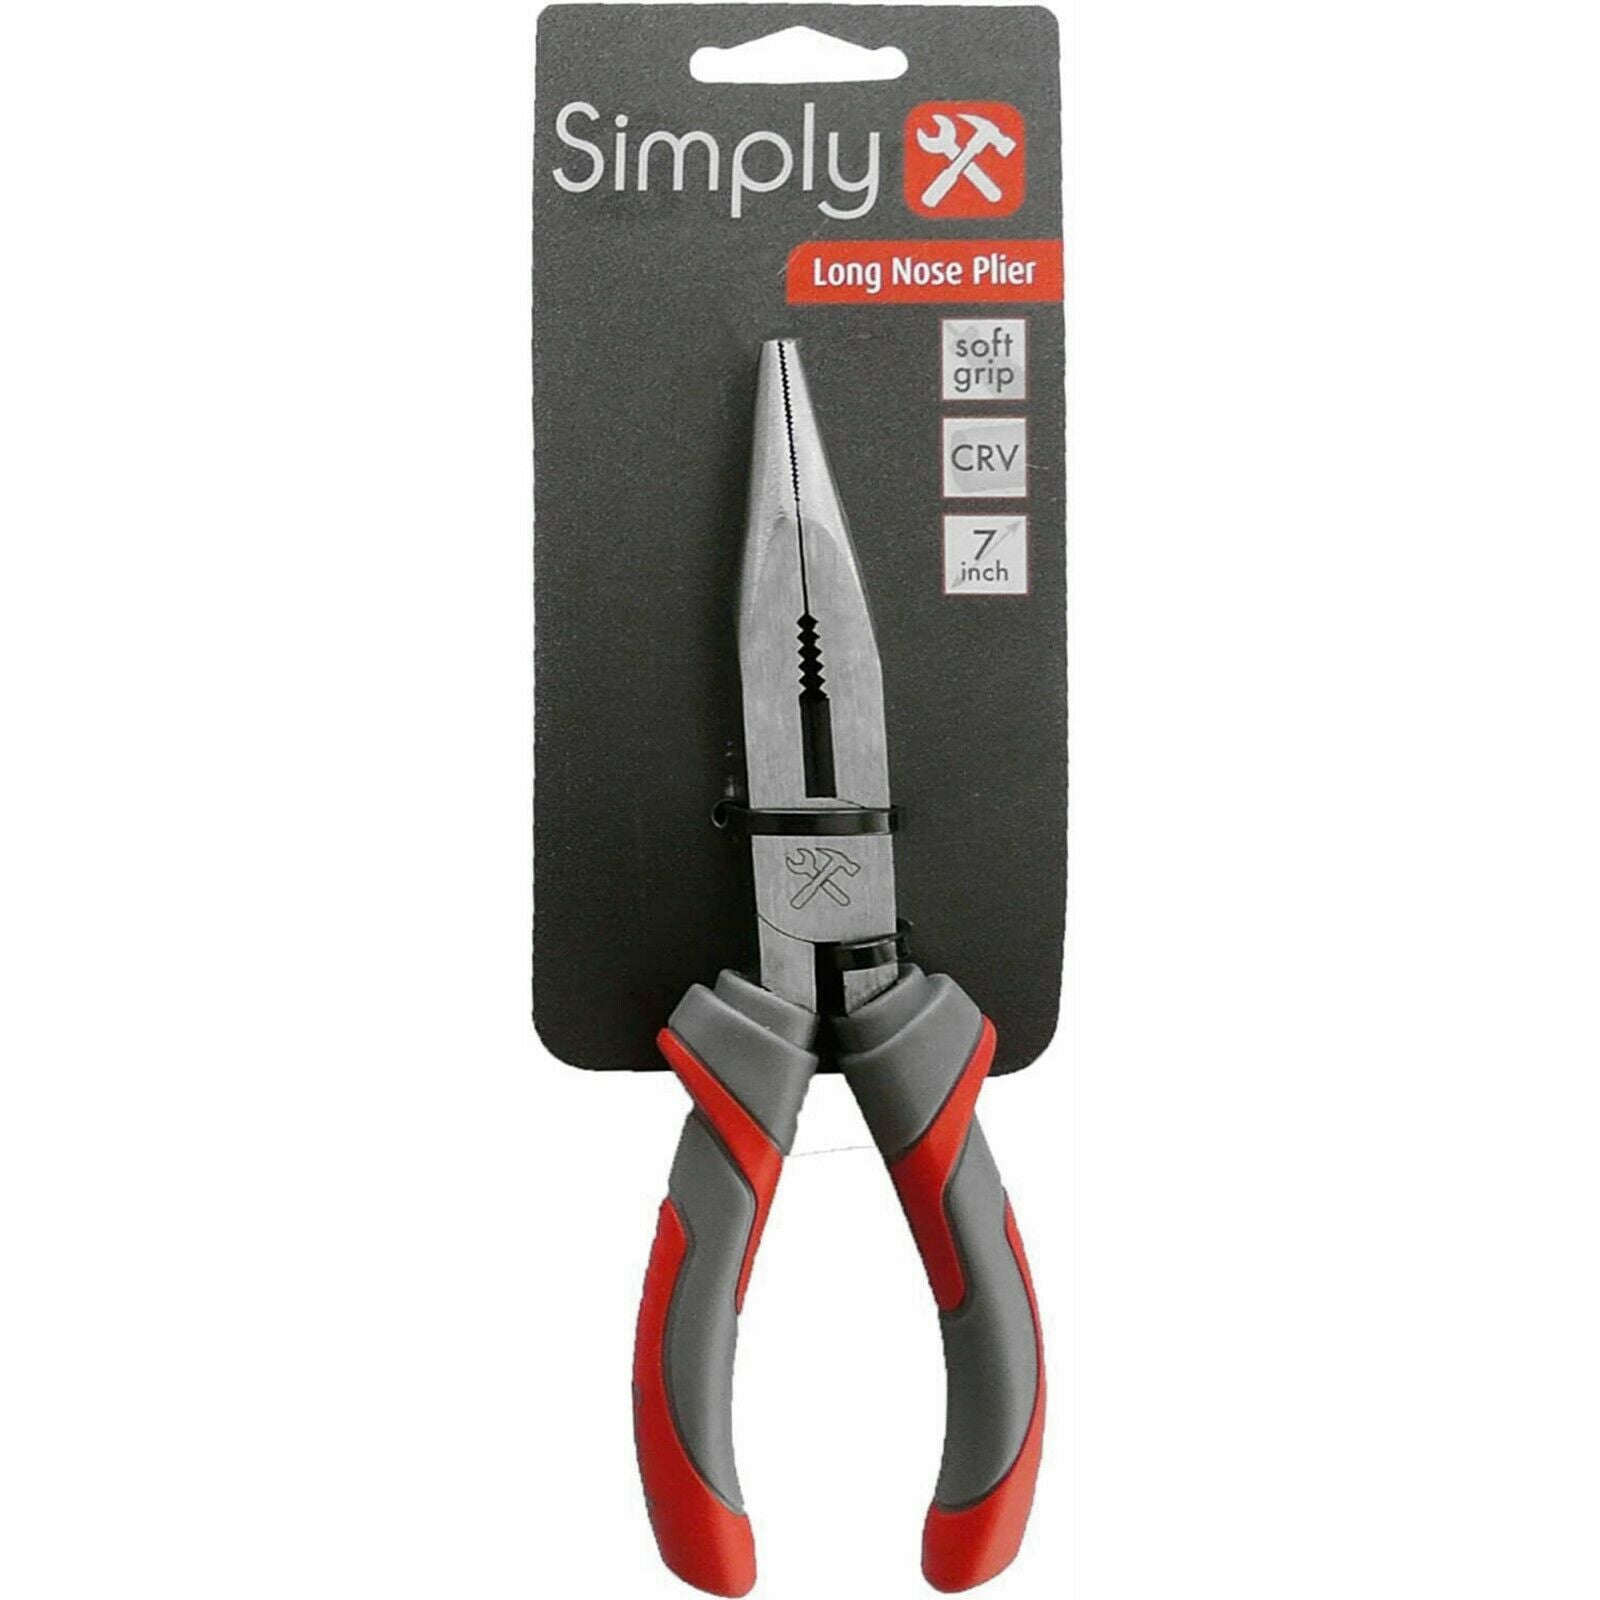 7 Inch Long Nose Pliers With Cutter - Soft Grip Handle - By Simply Tools - Sportandleisure.com (6968004608154)